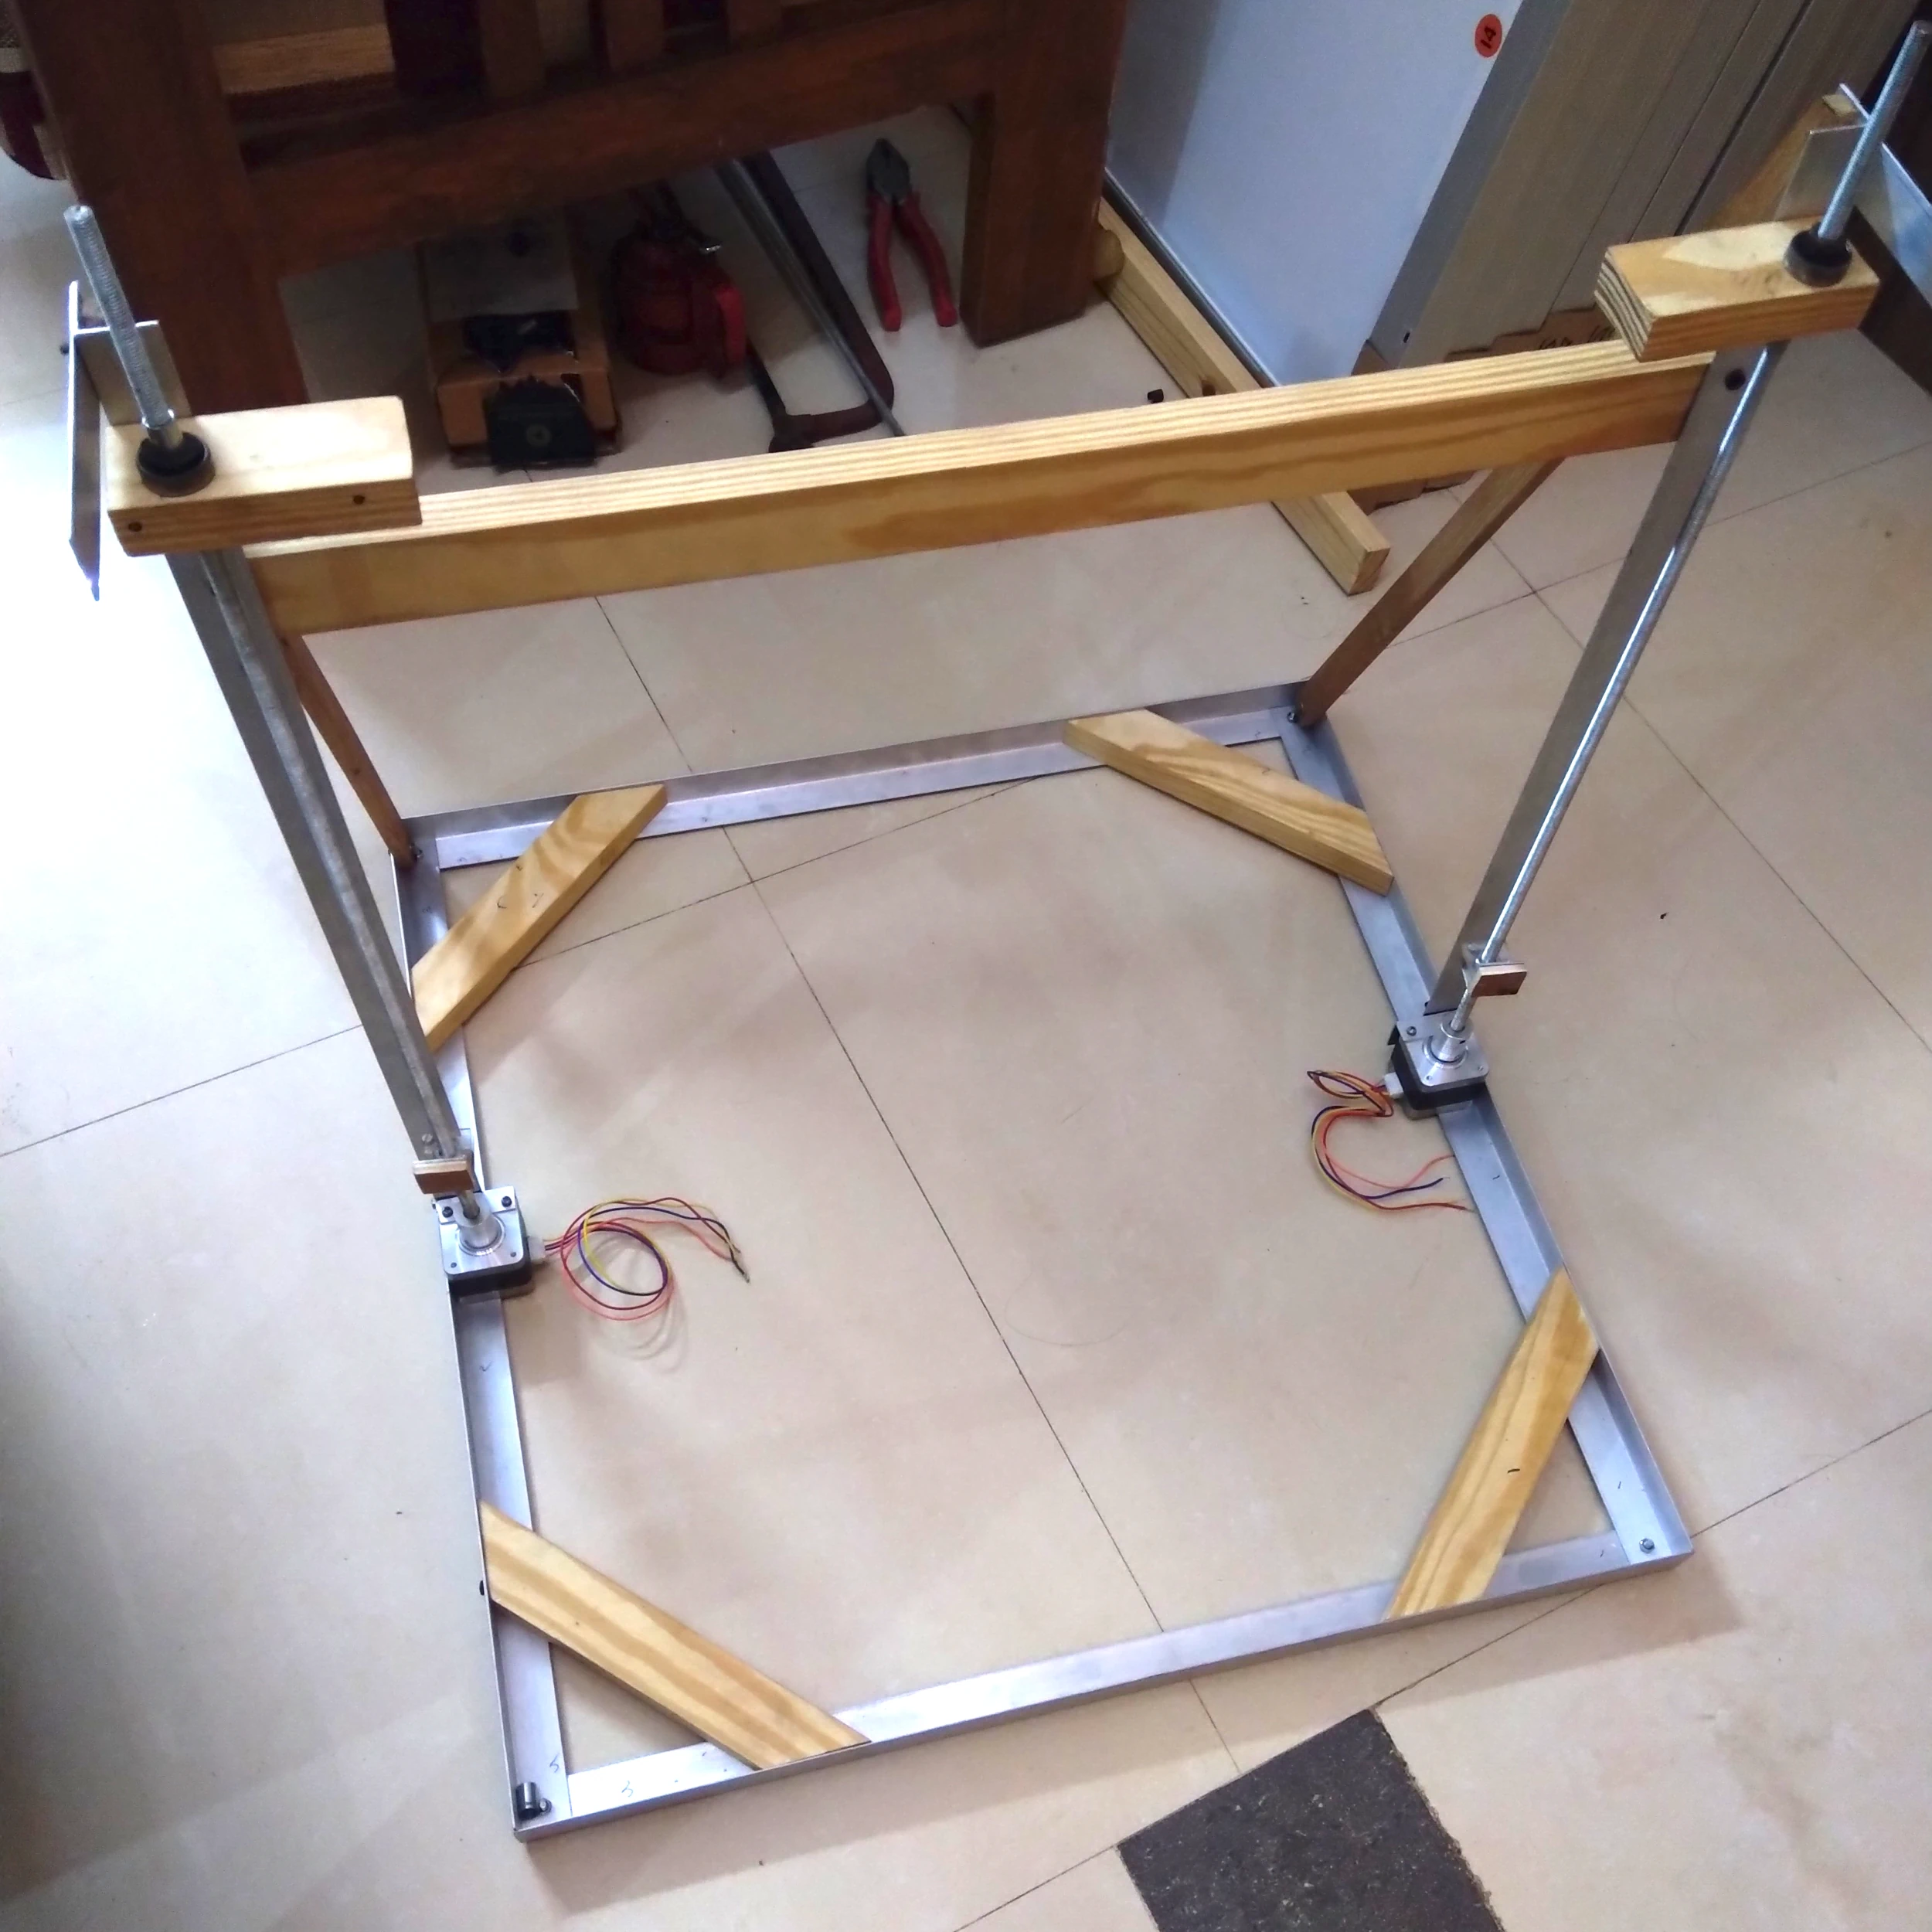 Frame with the threaded rods